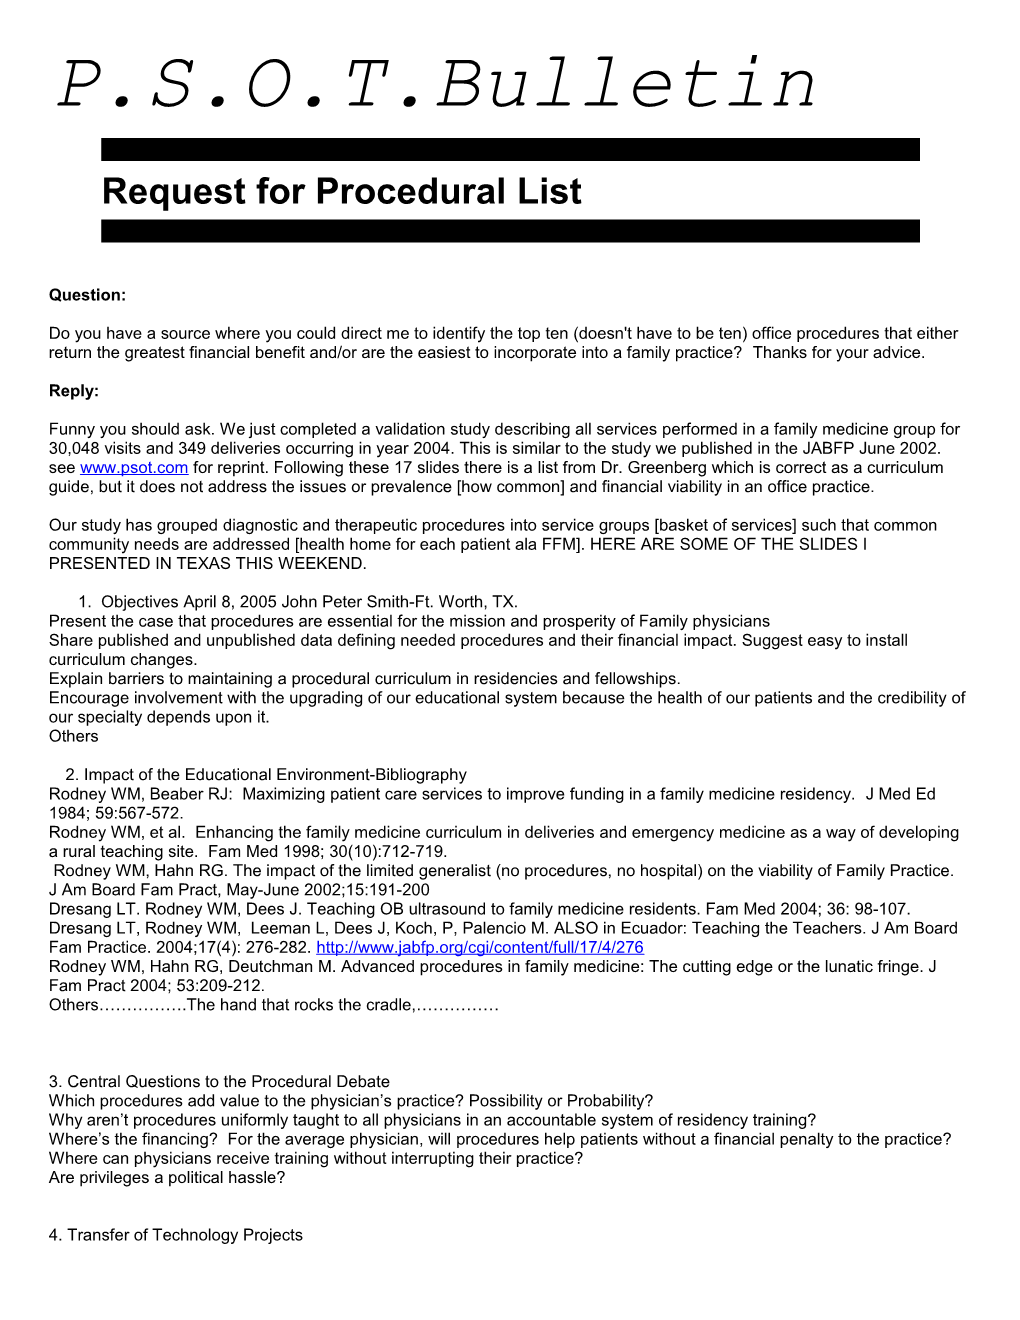 Request for Procedural List